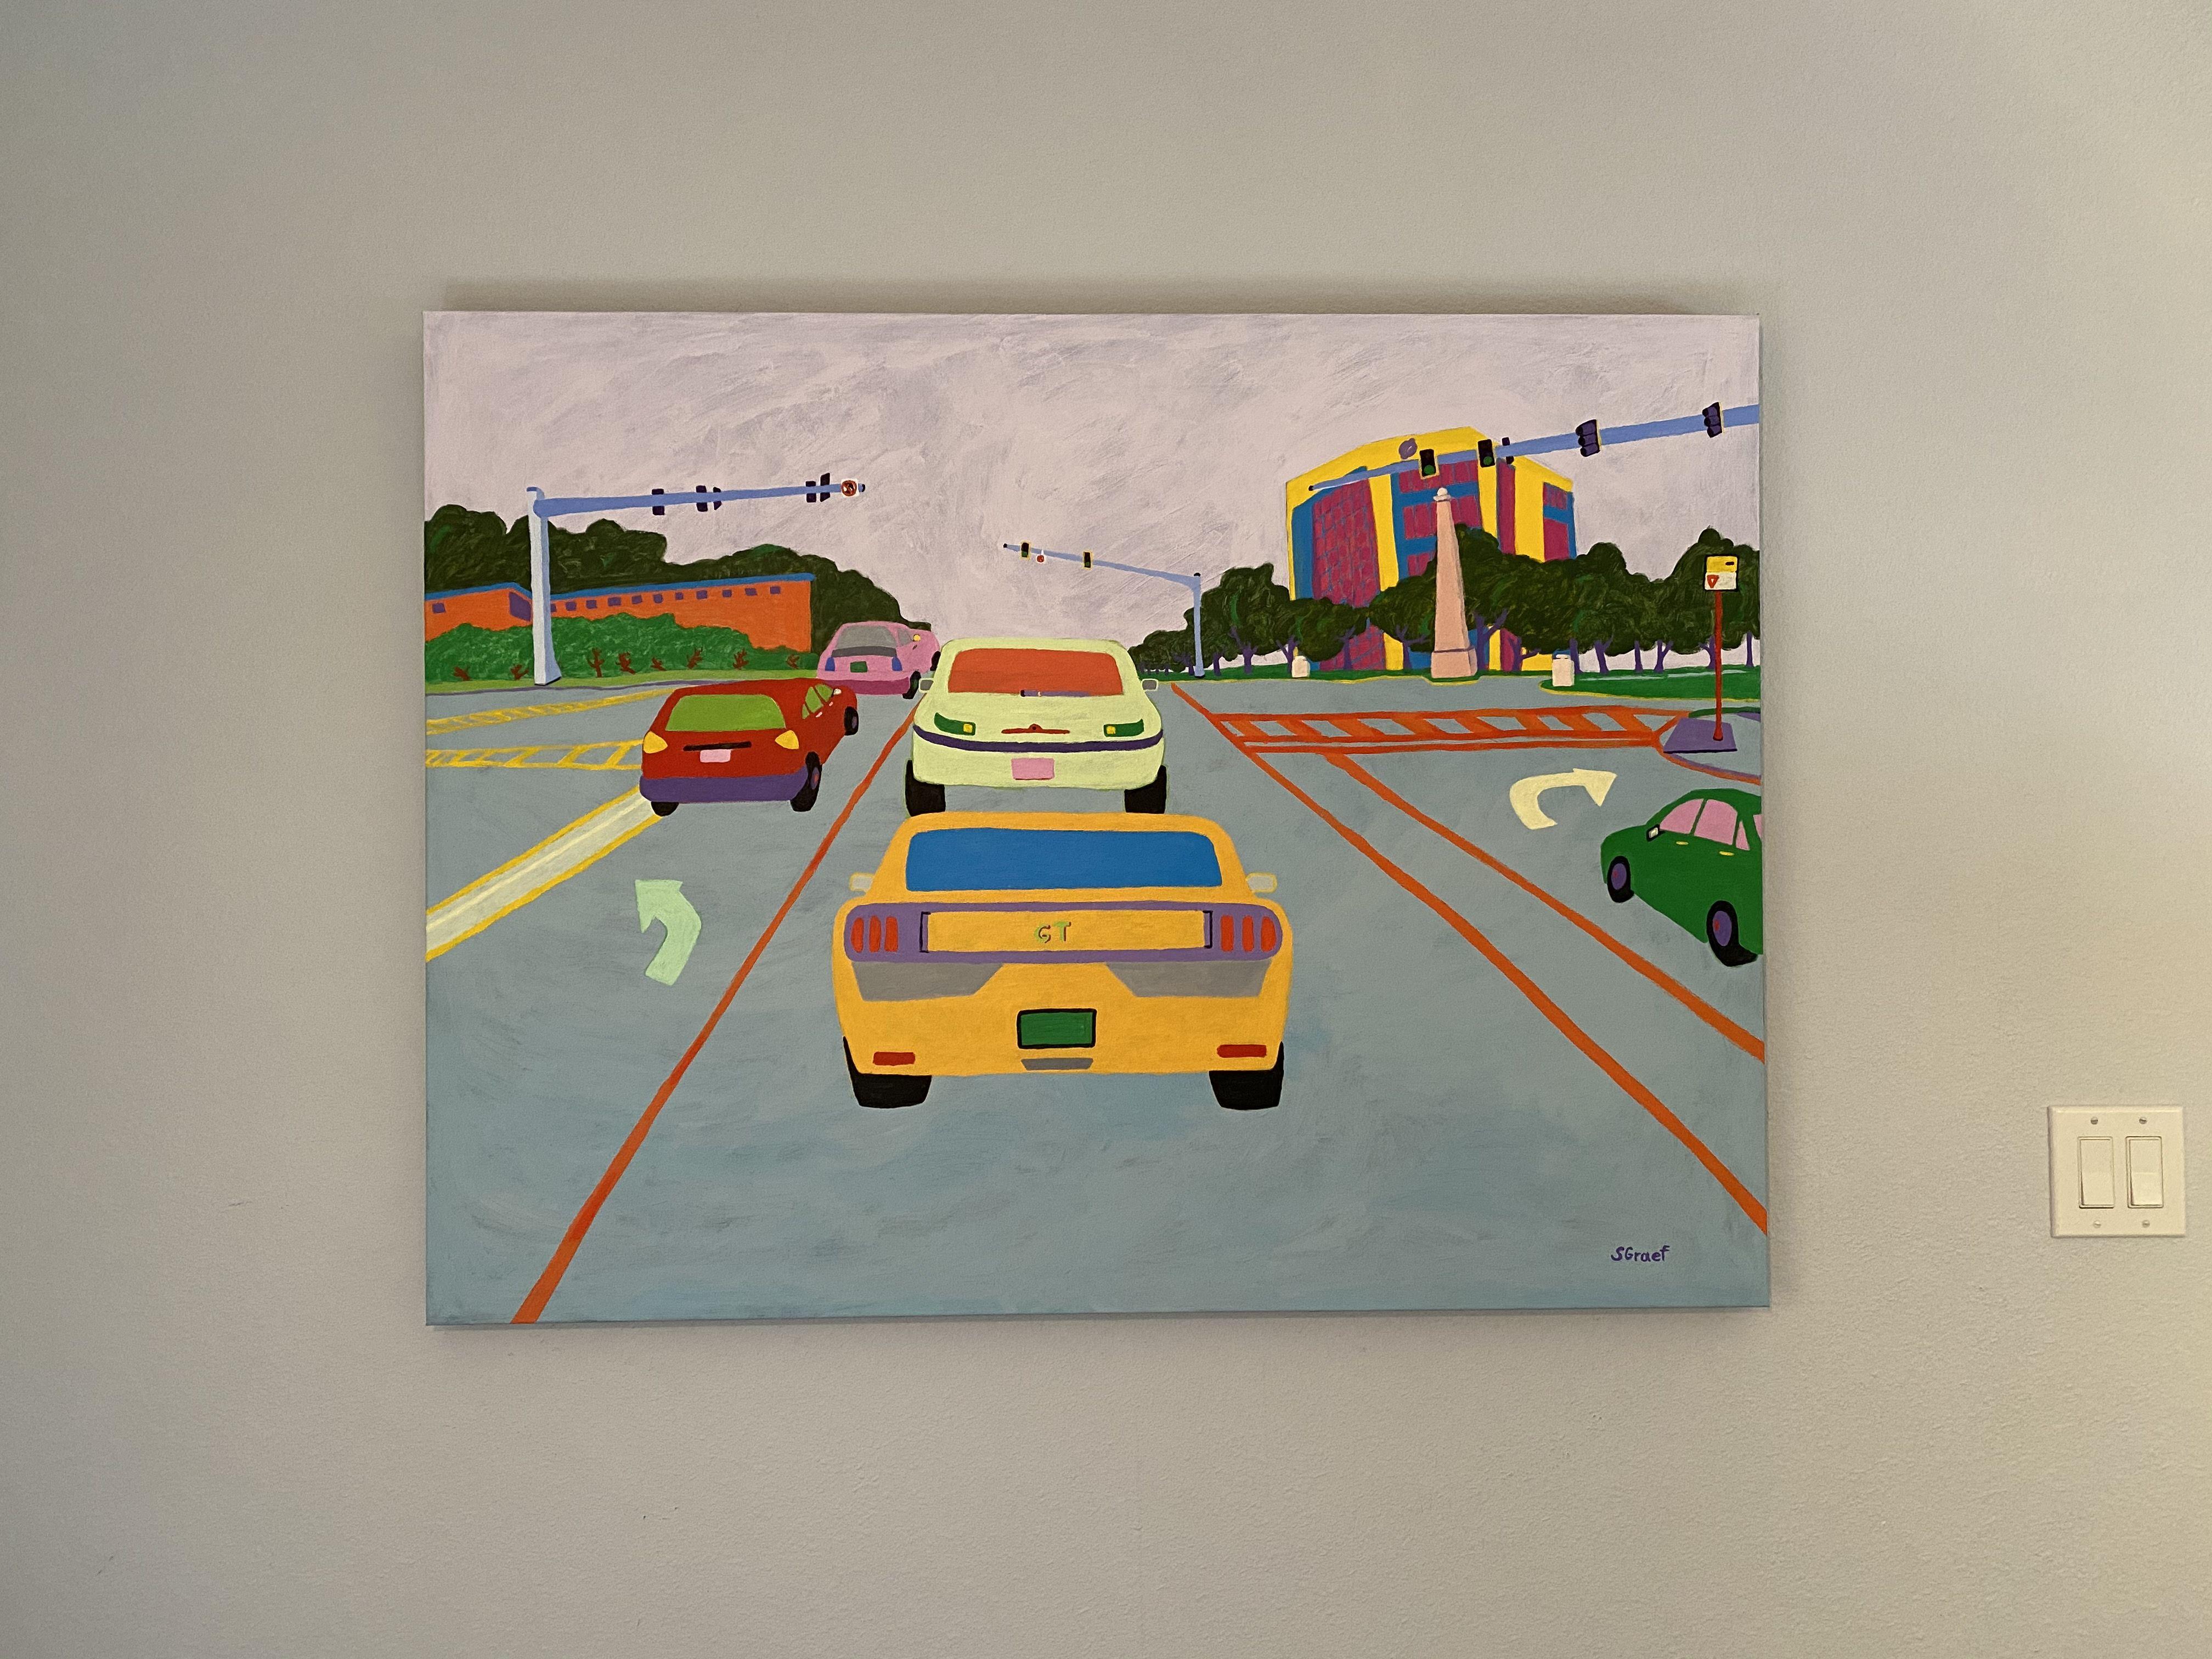 I was following my husband to the auto repair place to drop off his car for work. The light turned red and I stopped behind him, only to see another interesting scene to paint. So paint it I did, changing the colors of the cars as I wanted,